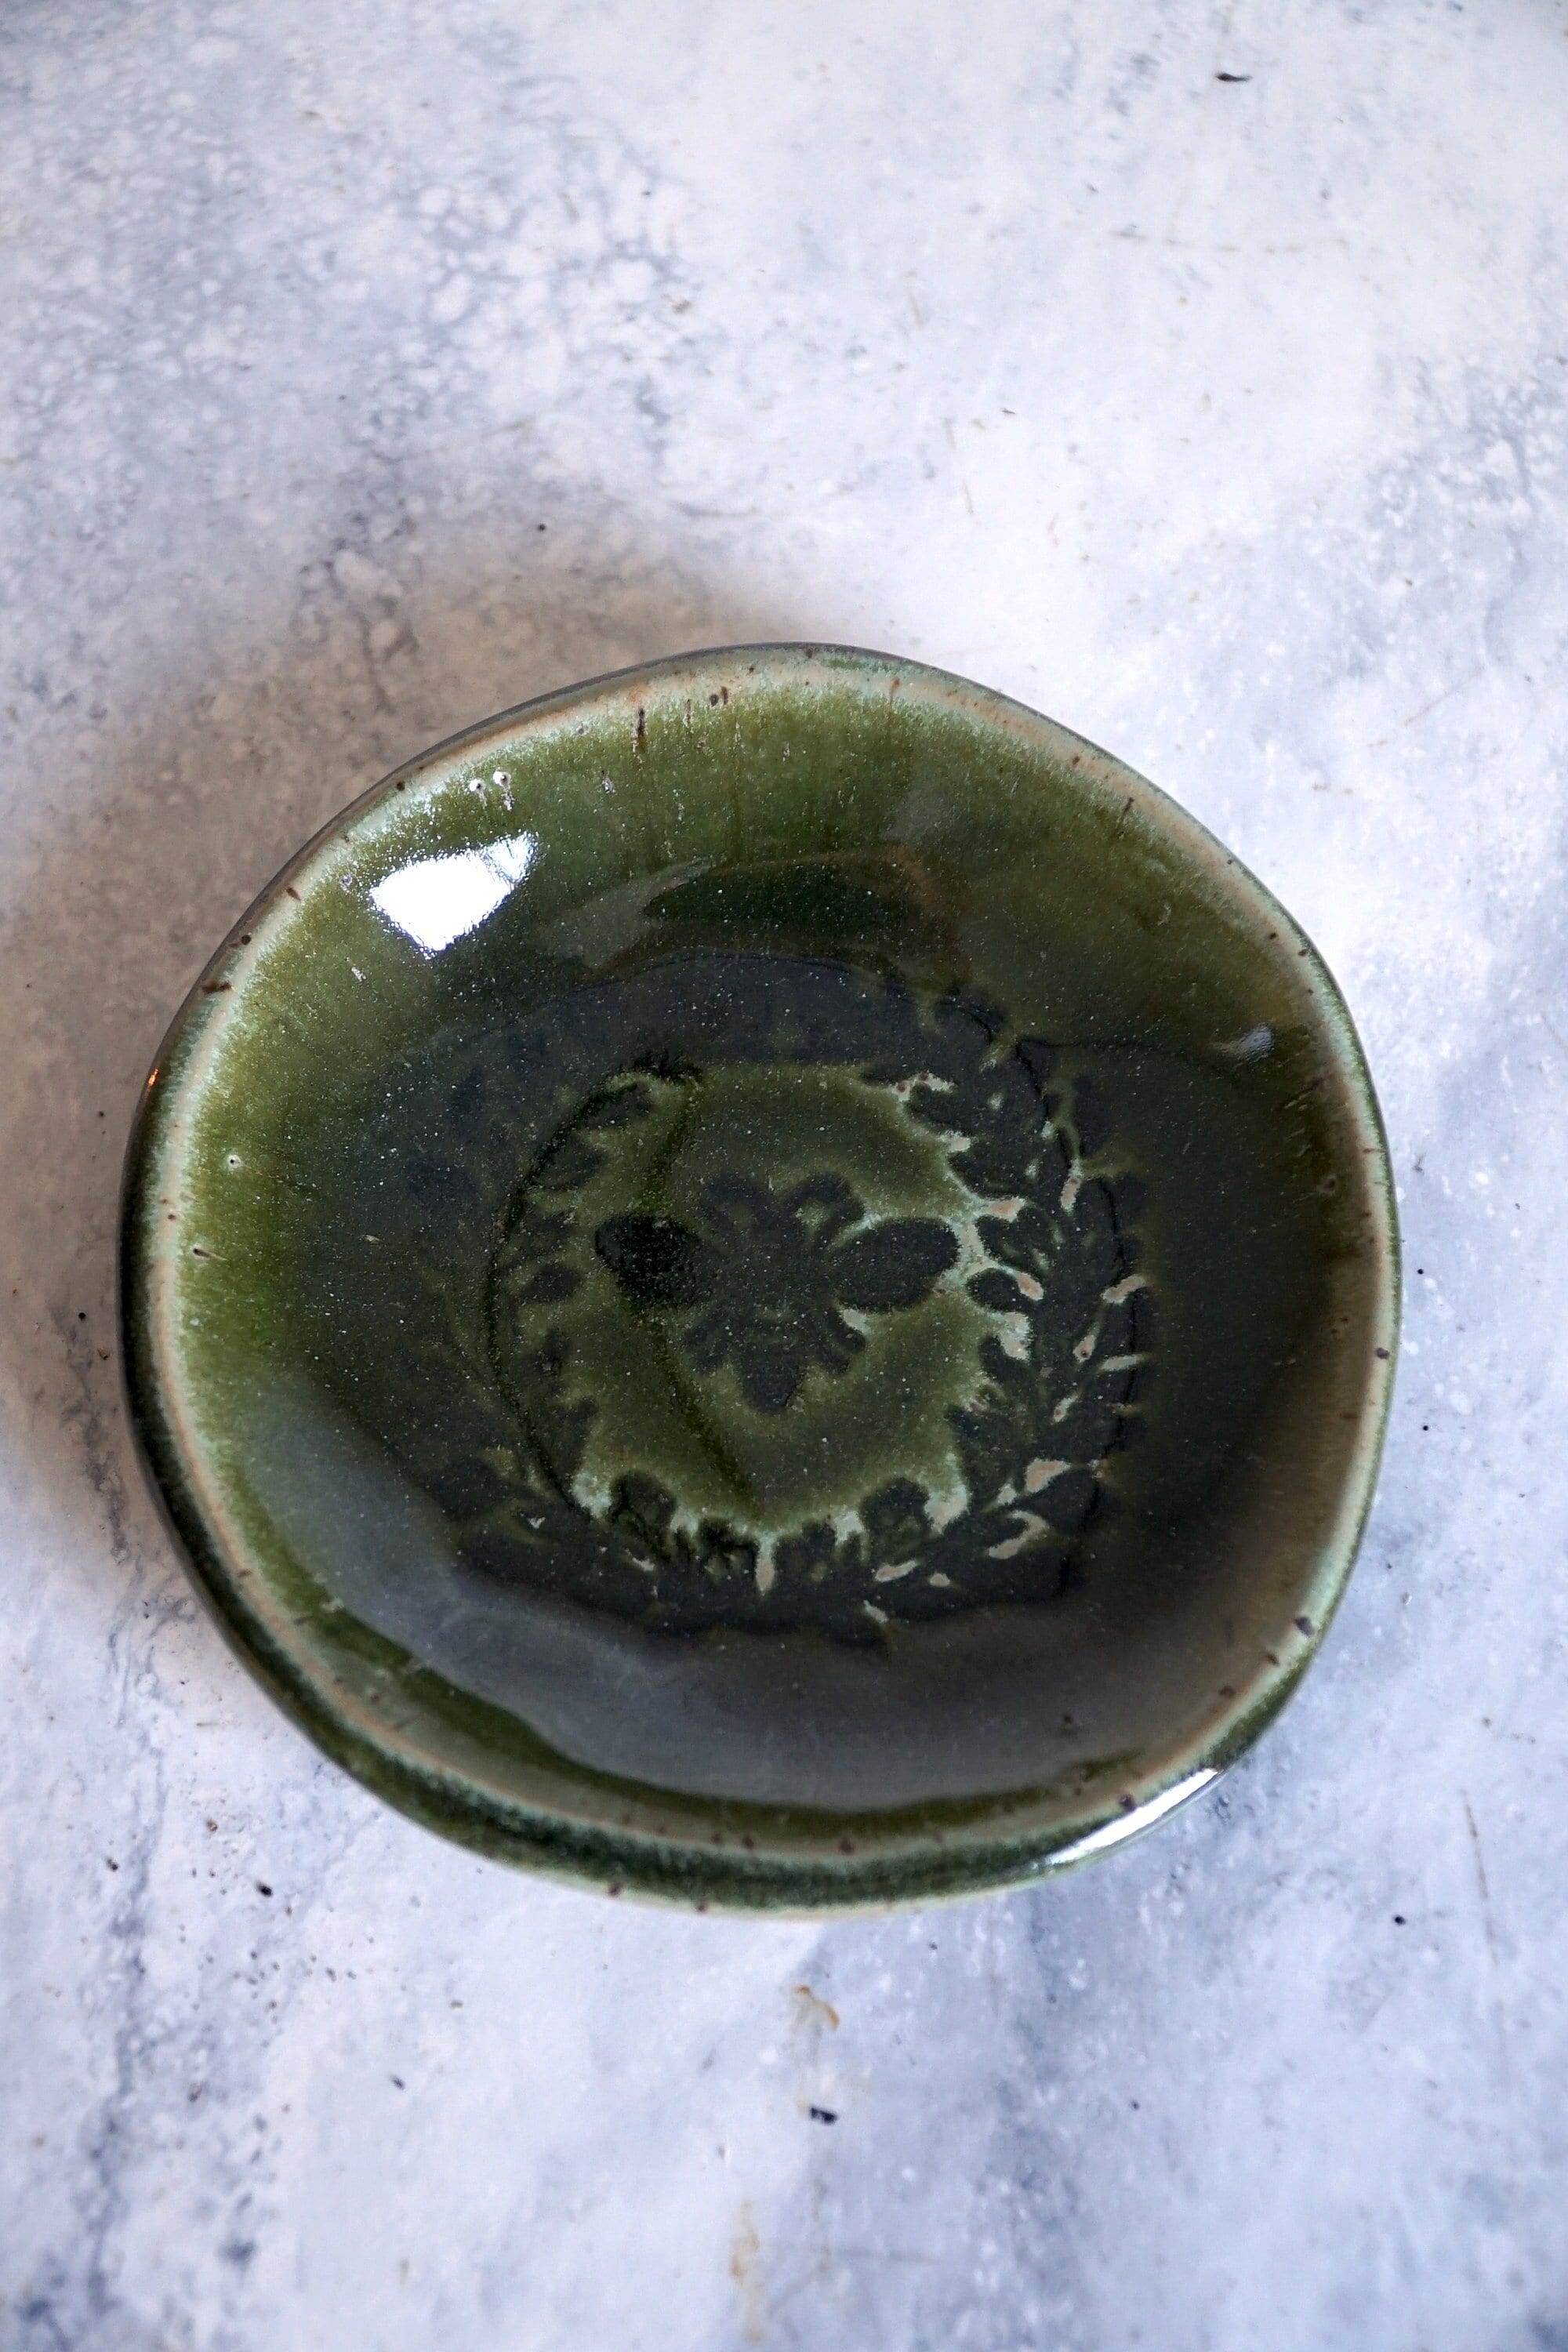 Glimmering Green Bee Stamp Stoneware Bowl - Small Bowl - Stamped Dish - Catch-All - Jewelry Storage - Food Safe - Deco Green Honeybee Bowl